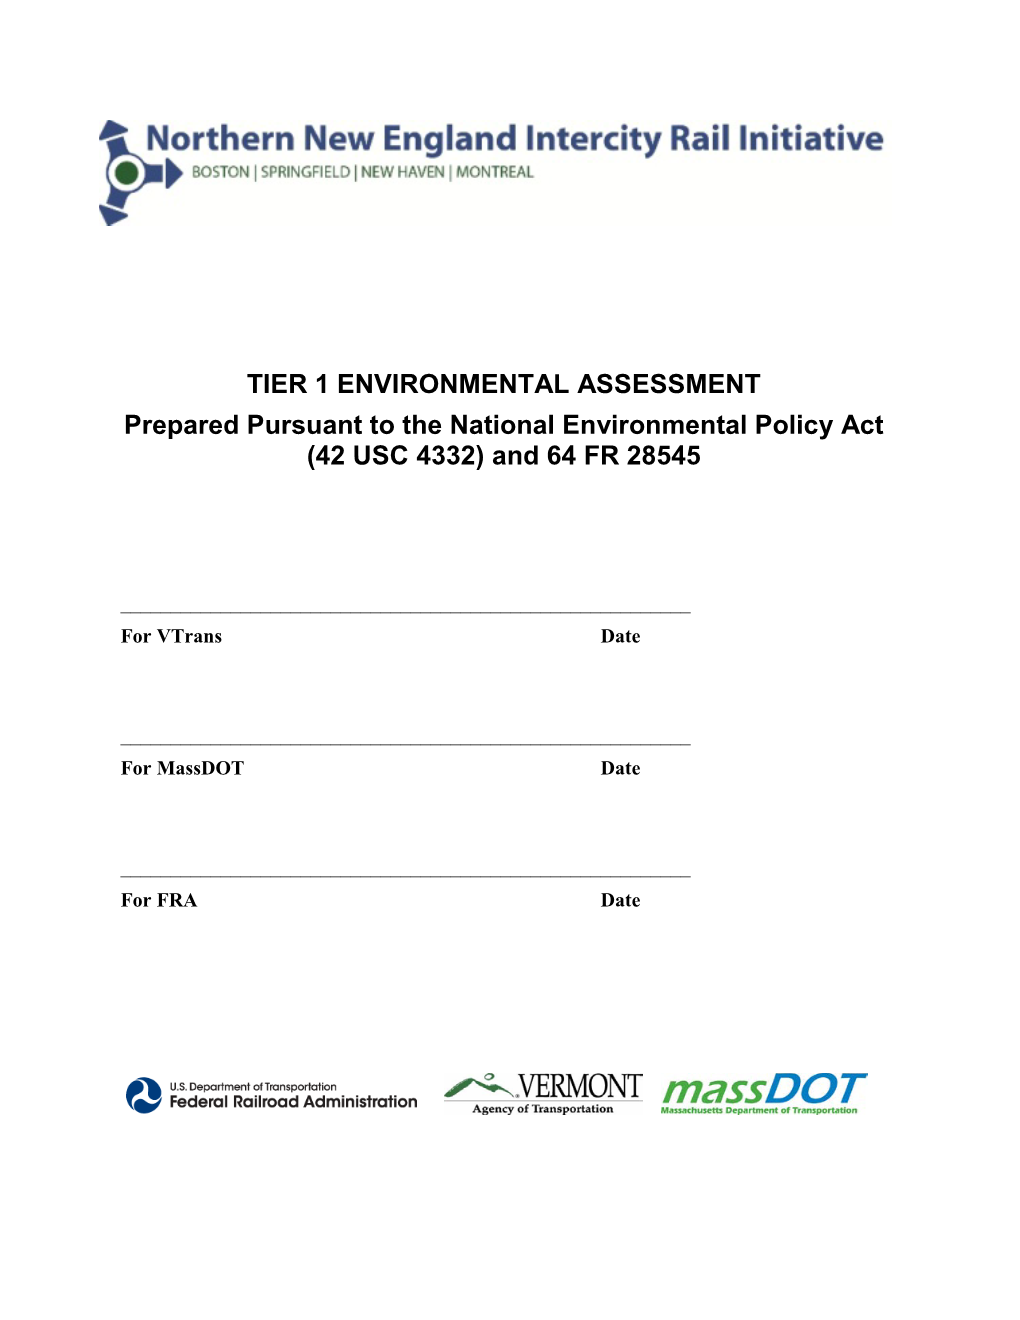 ENVIRONMENTAL ASSESSMENT Prepared Pursuant to the National Environmental Policy Act (42 USC 4332) and 64 FR 28545